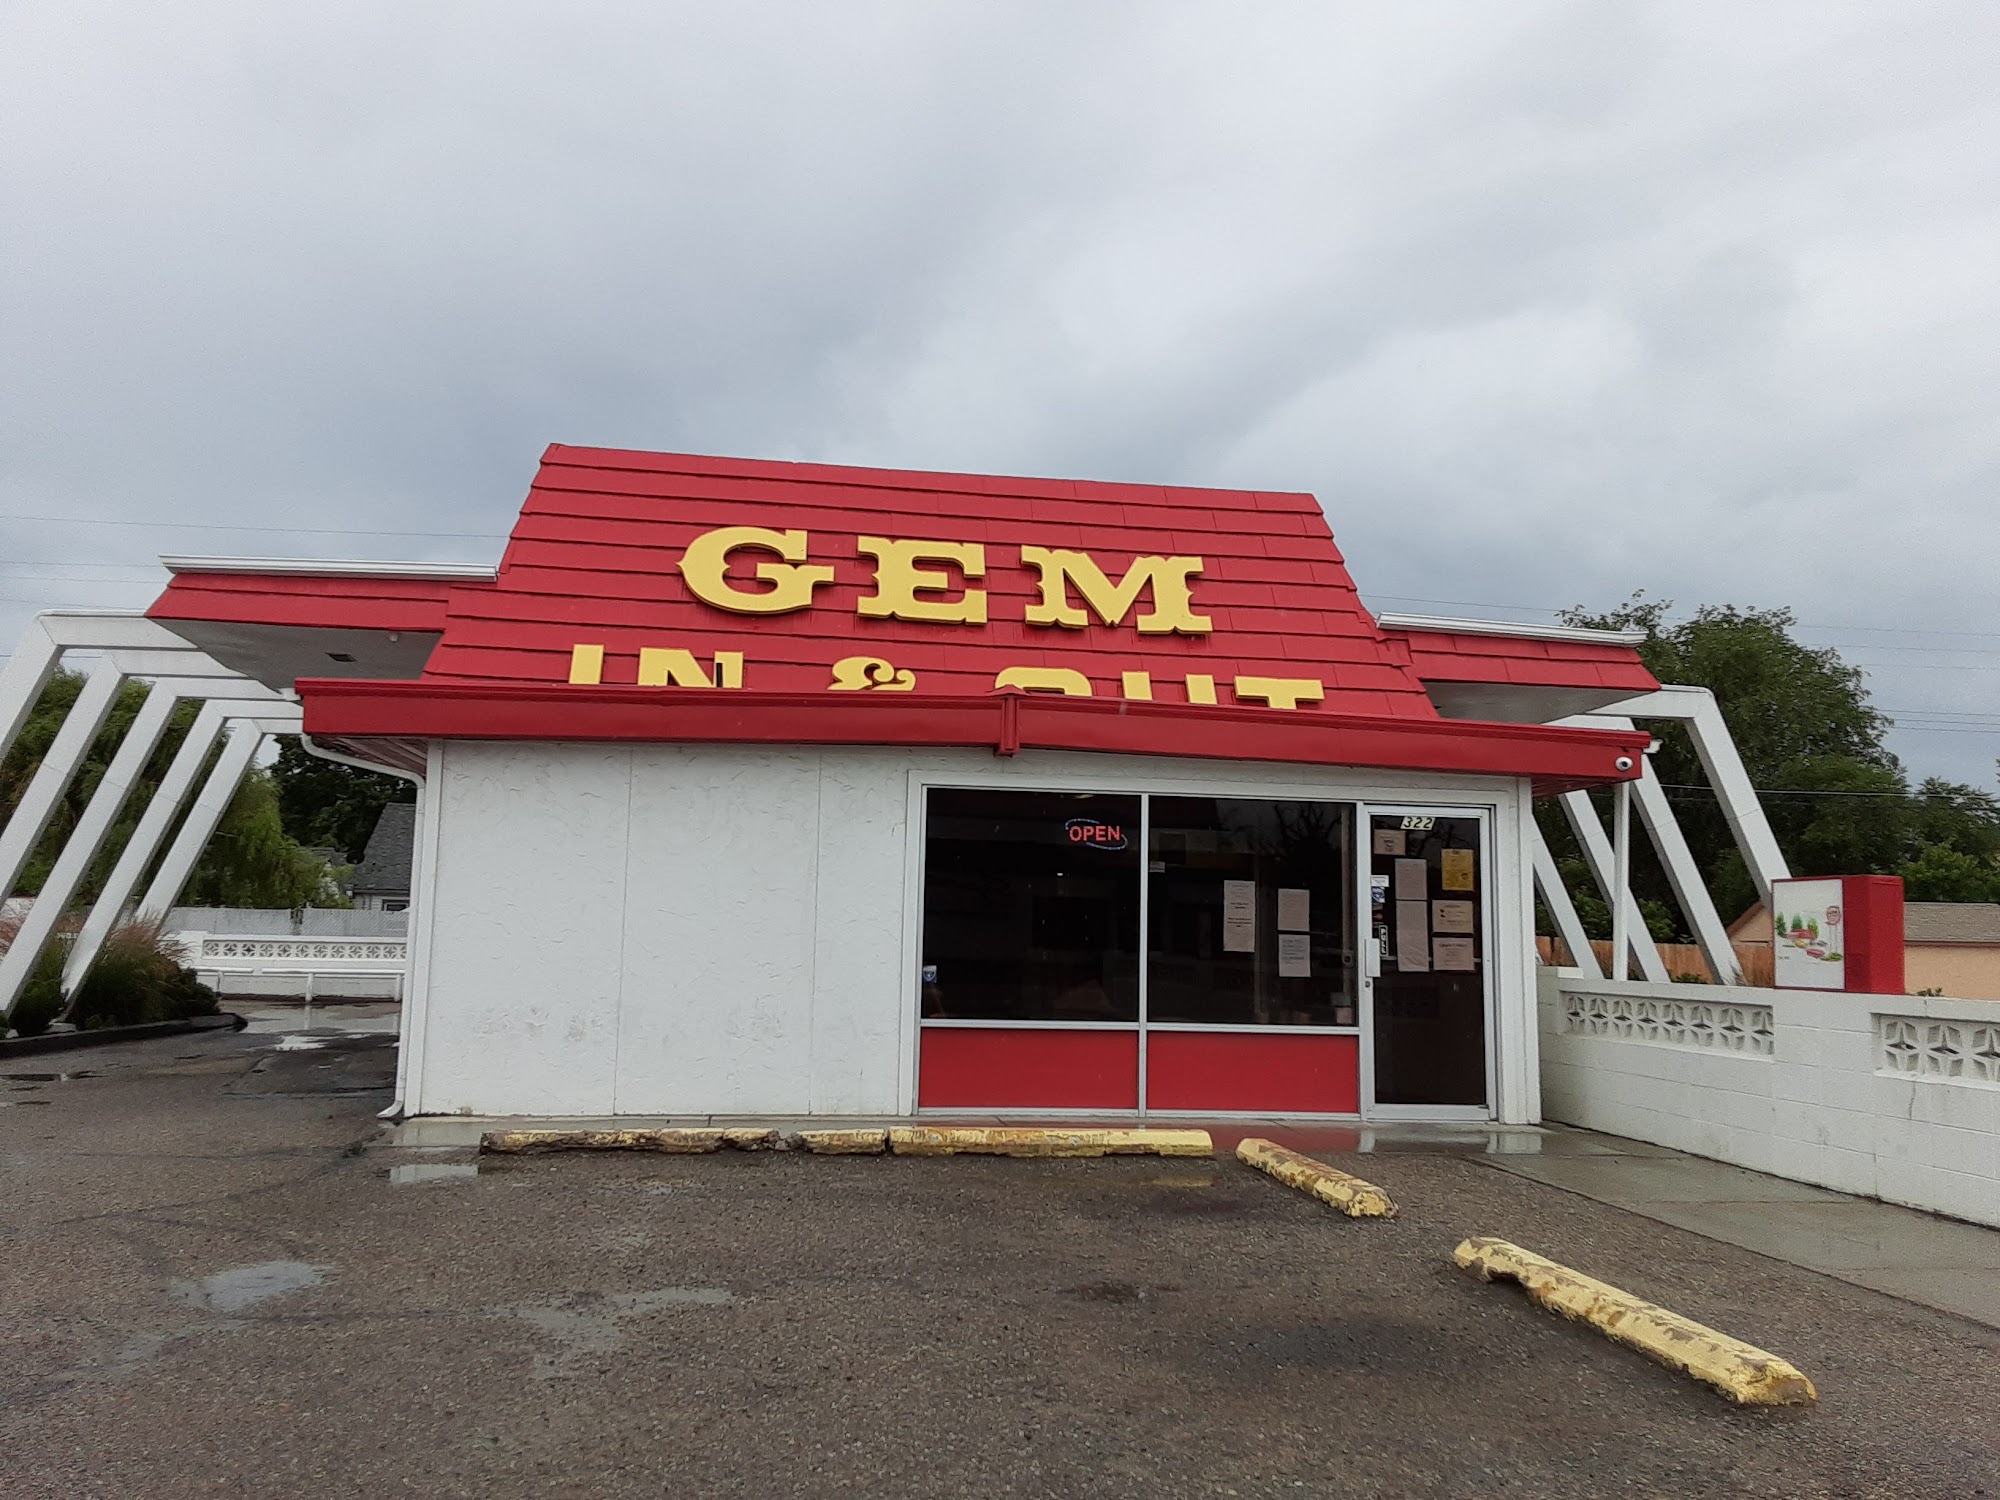 Gem In & Out 322 Cleveland Blvd, Caldwell, ID 83605